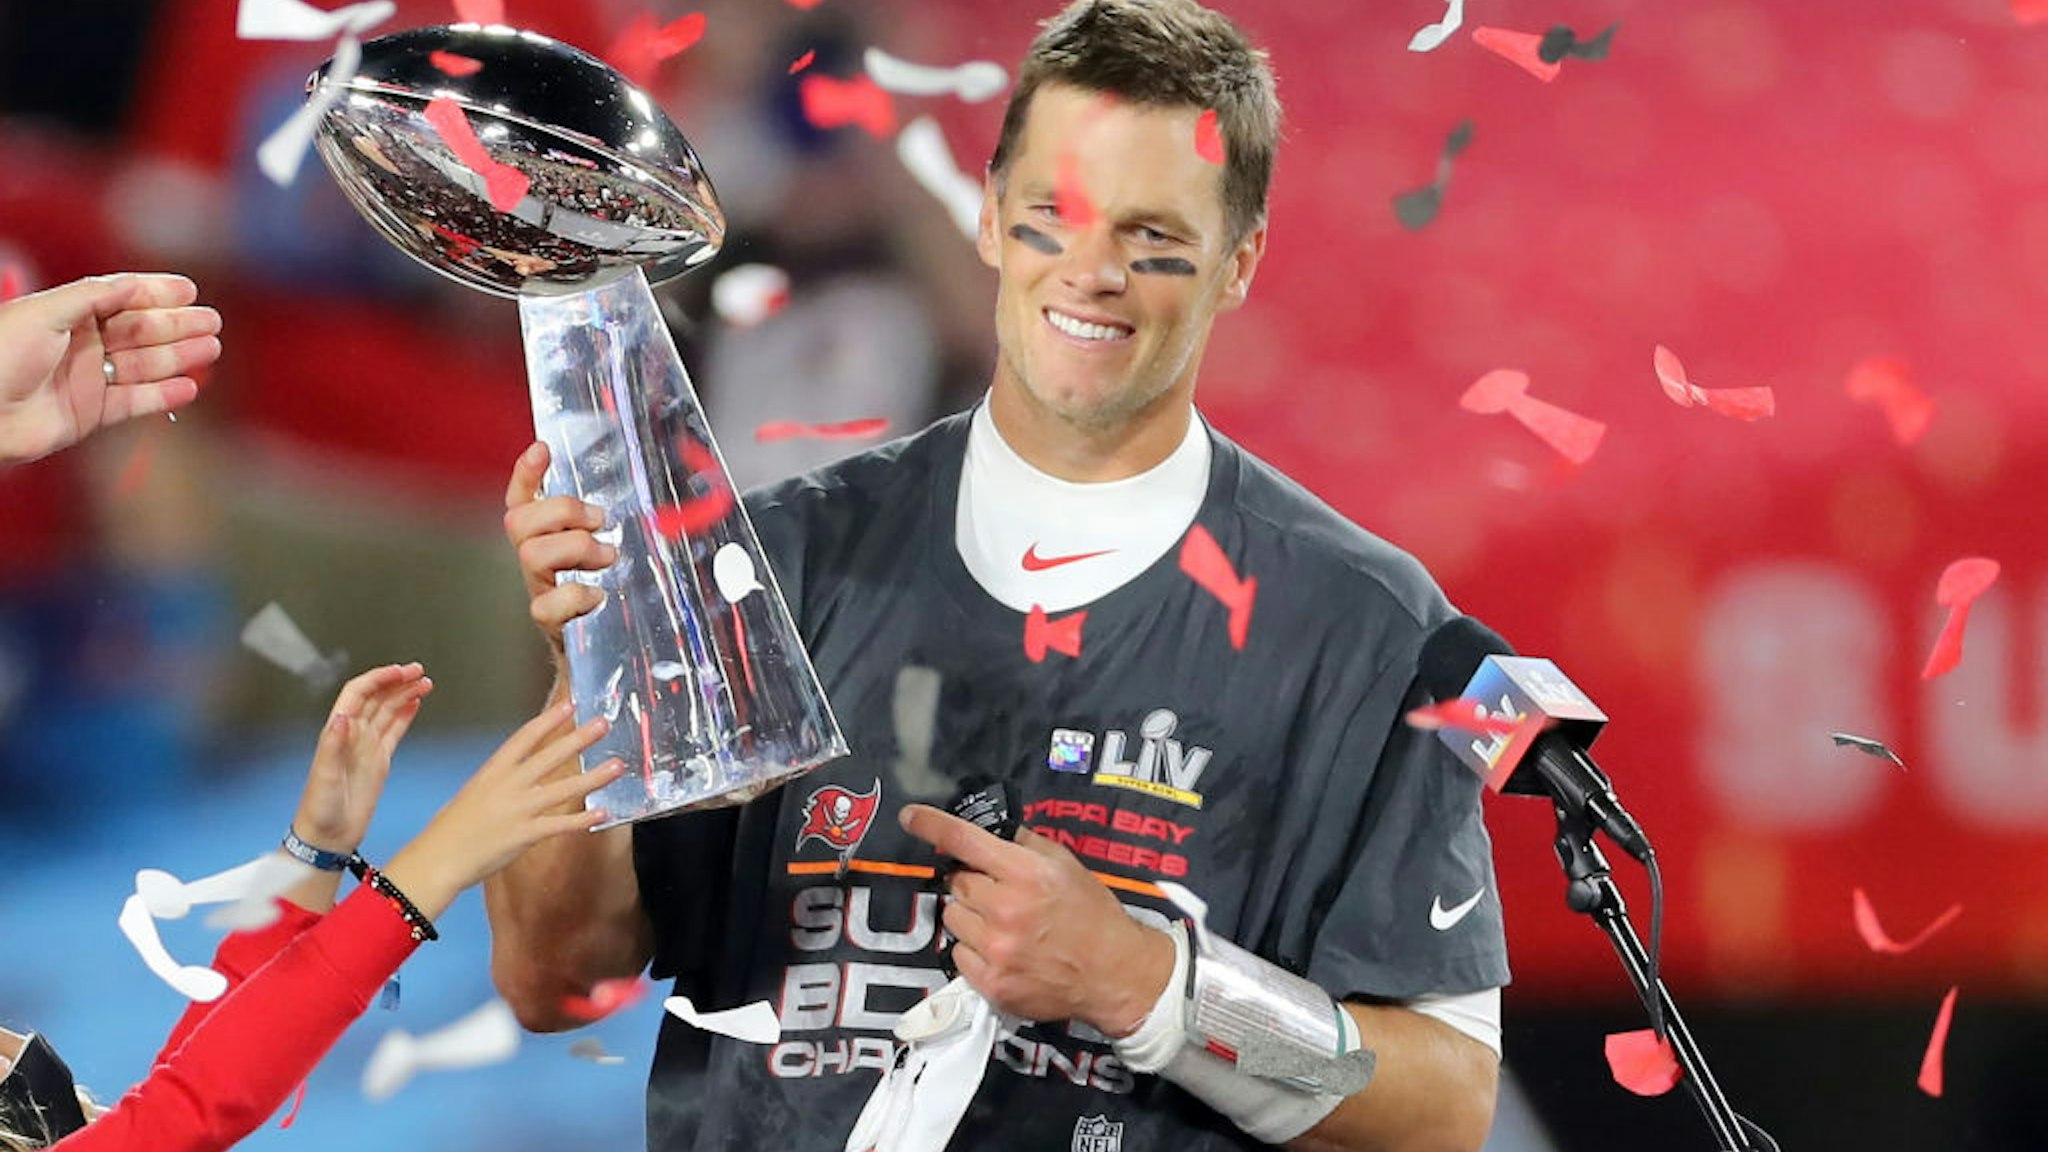 Super Bowl MVP Tom Brady (12) of the Buccaneers holds the Lombardi Trophy after the Super Bowl LV game between the Kansas City Chiefs and the Tampa Bay Buccaneers on February 7, 2021 at Raymond James Stadium, in Tampa, FL.